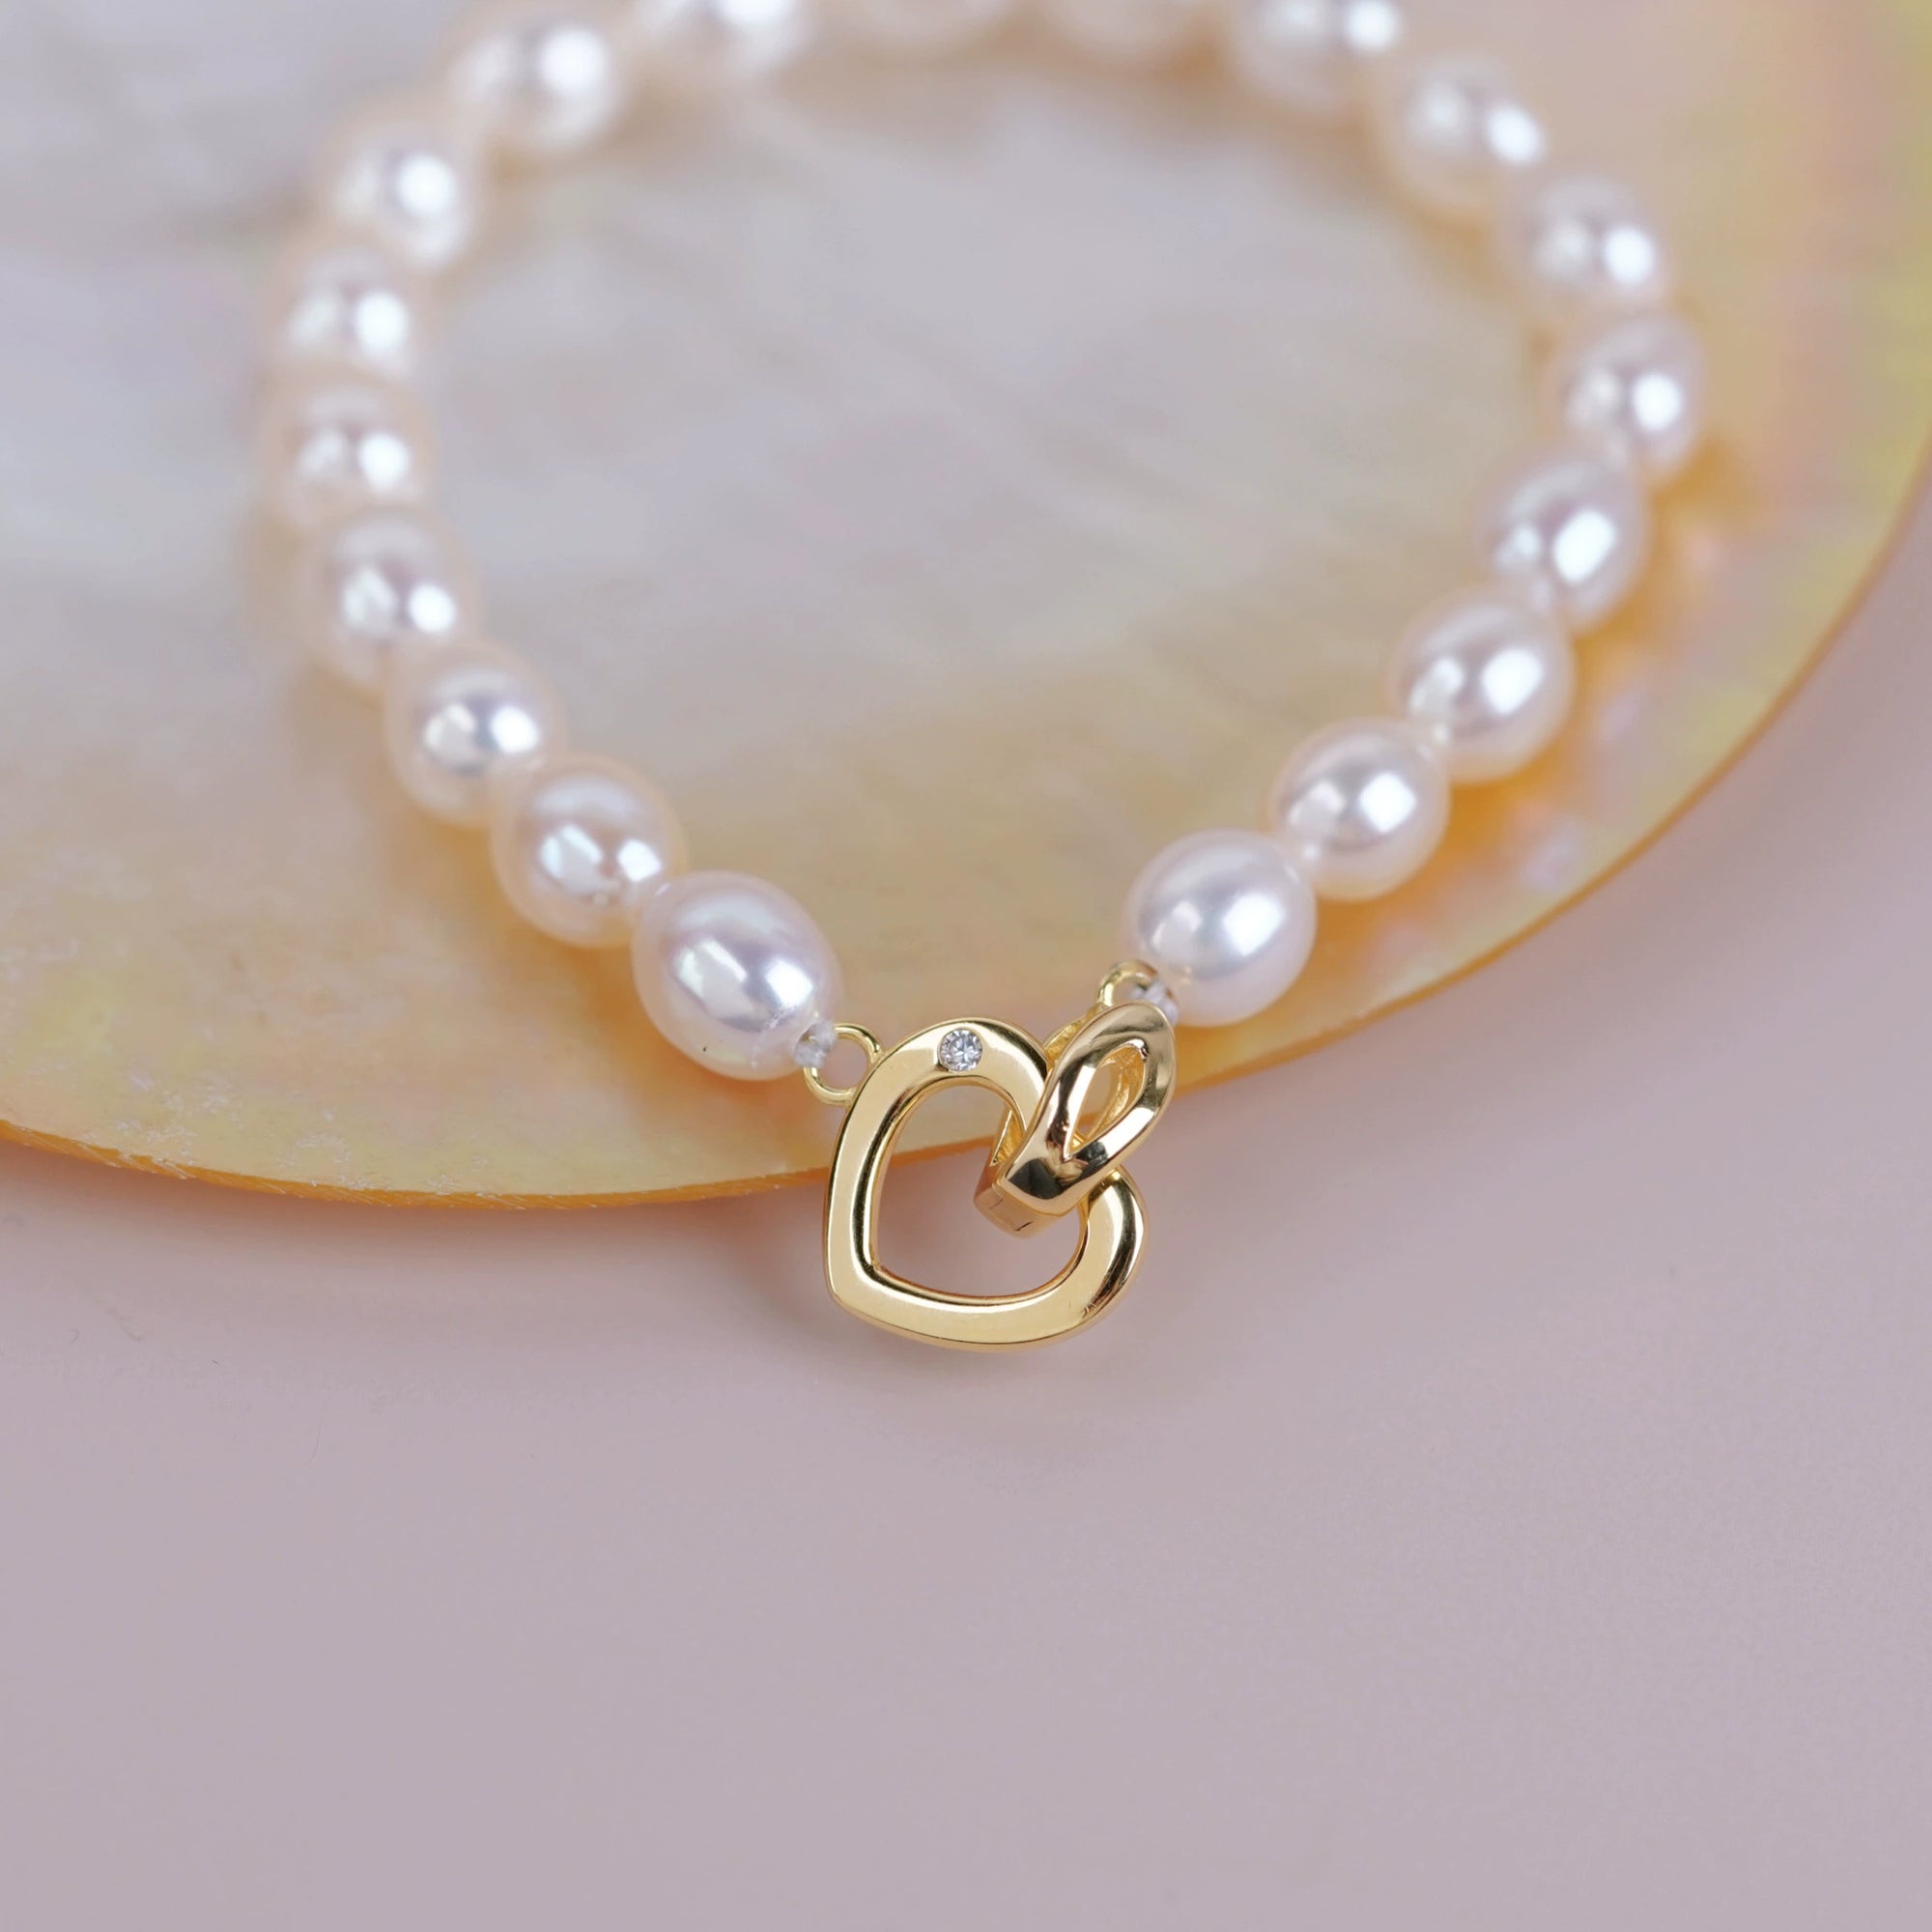 S925 sterling silver love heart clasp